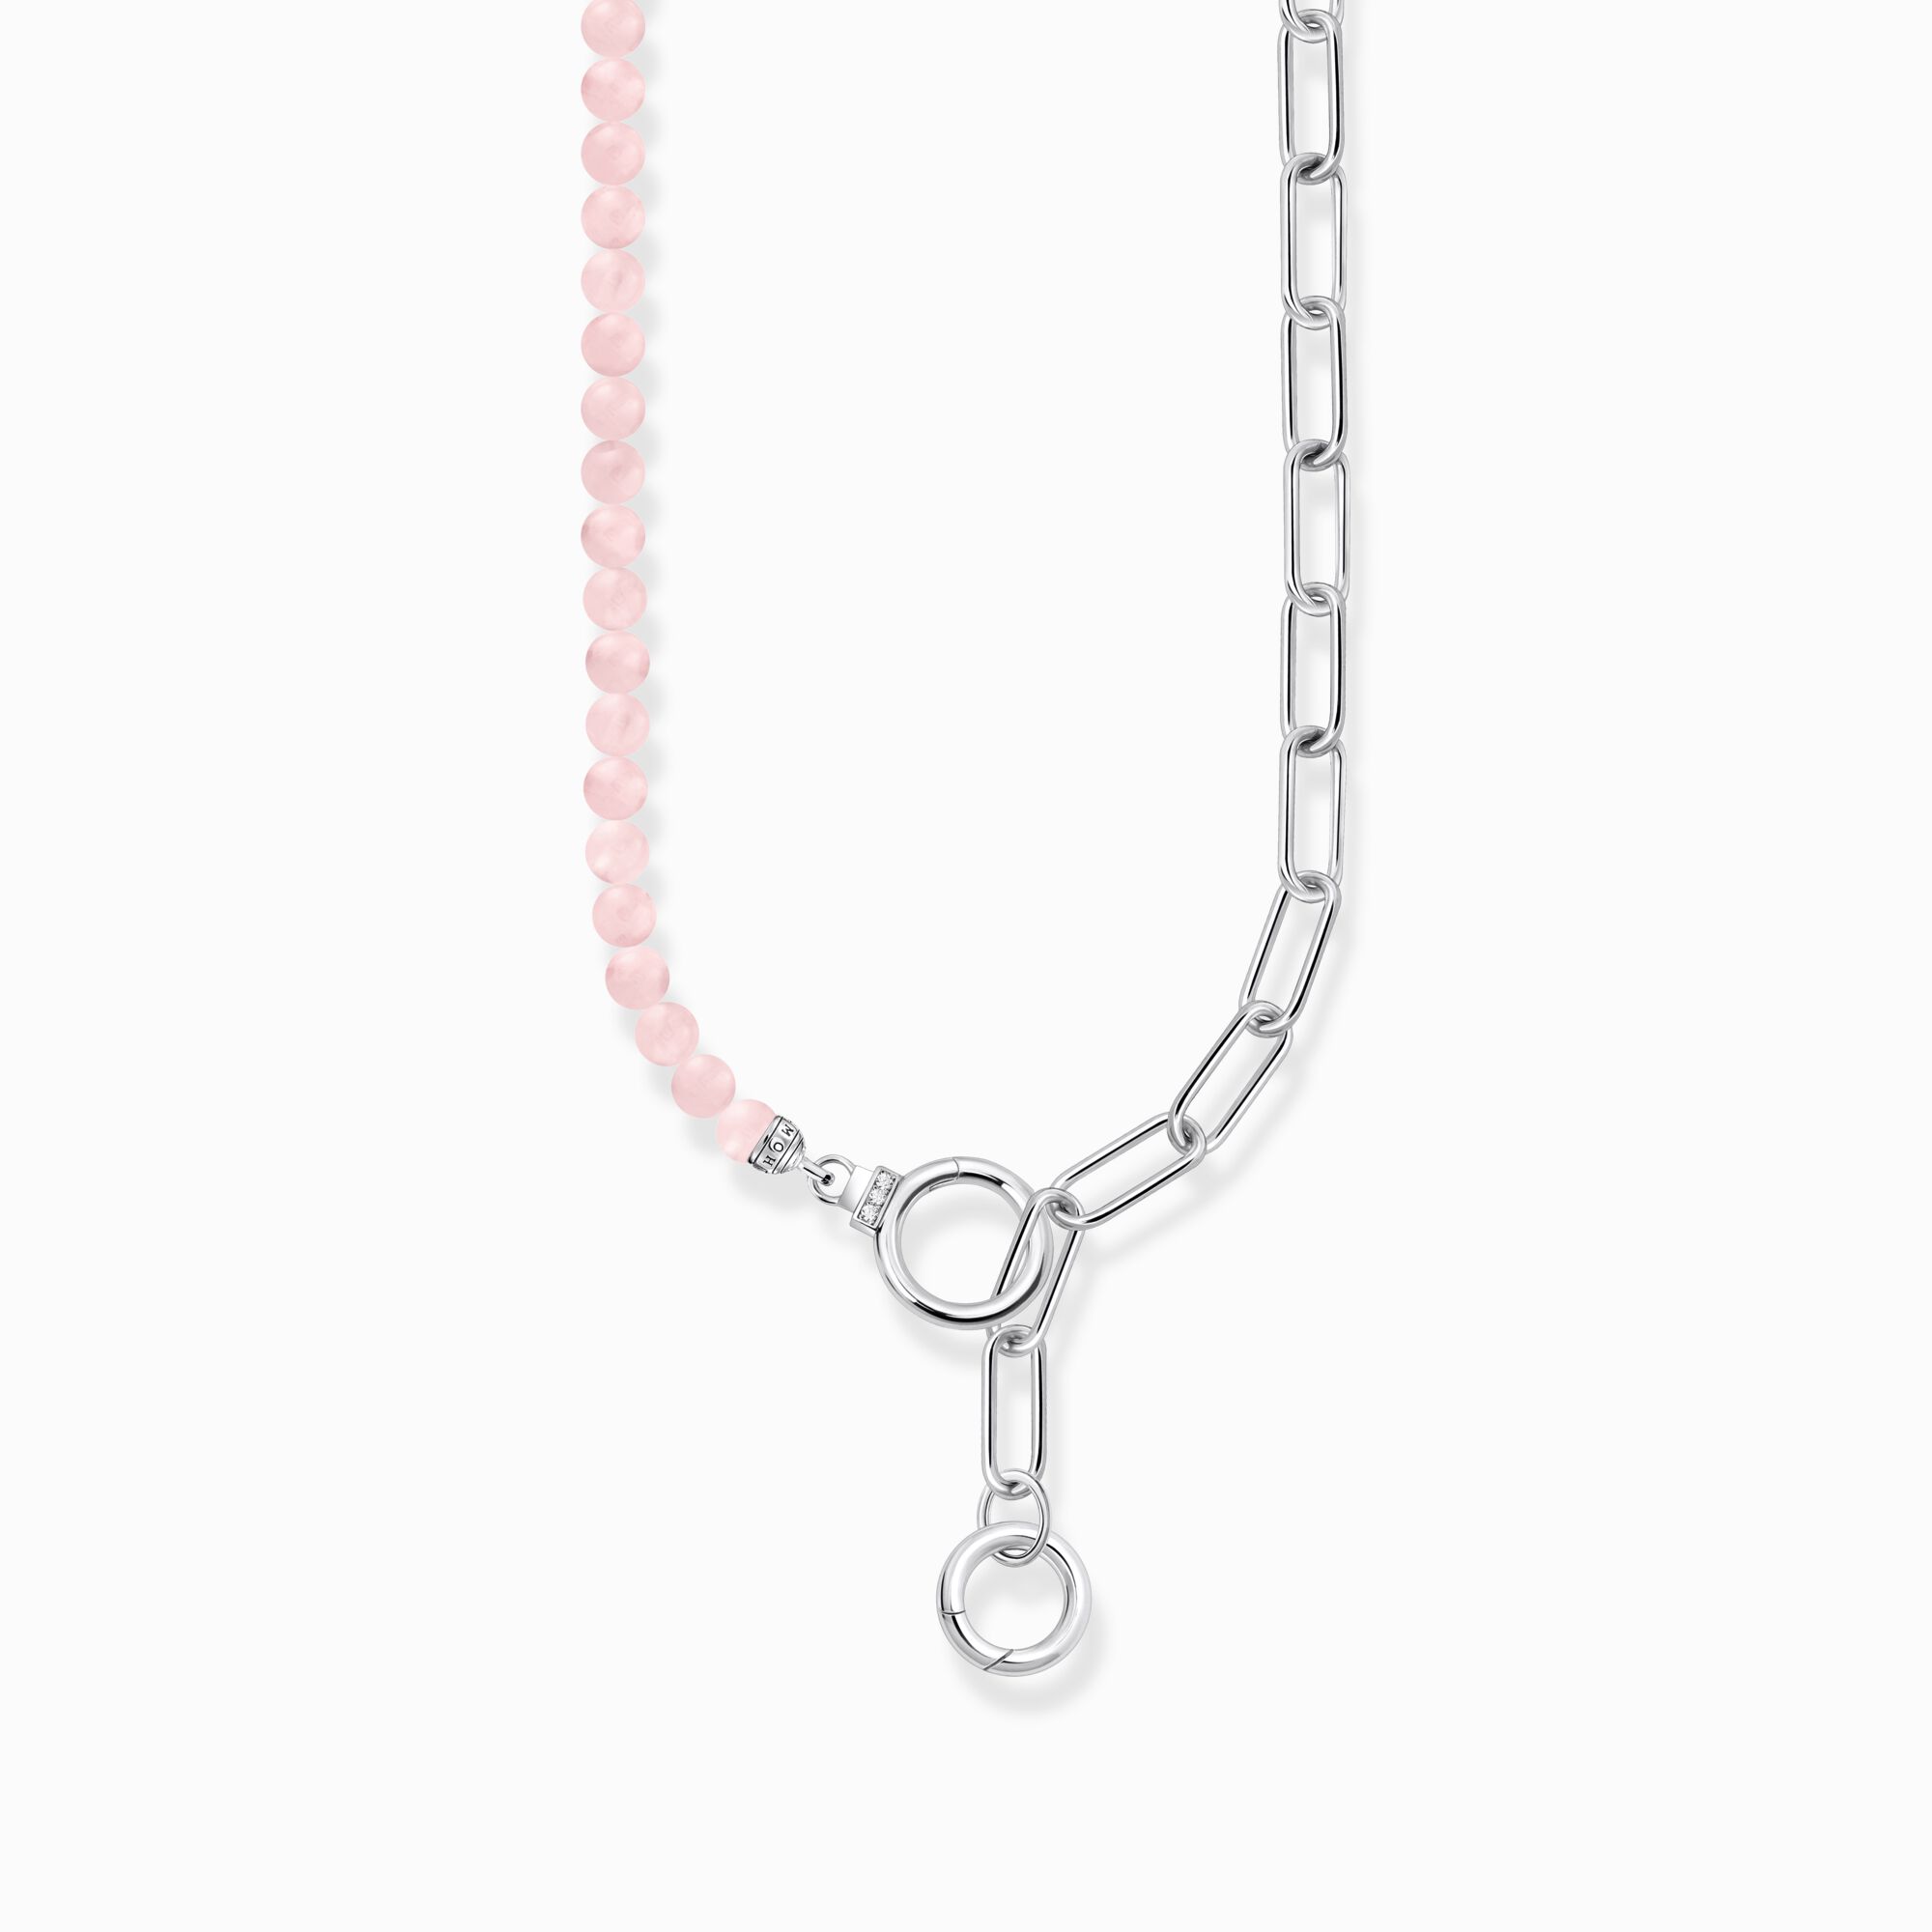 Silver necklace with link chain elements and rose quartz  beads from the  collection in the THOMAS SABO online store